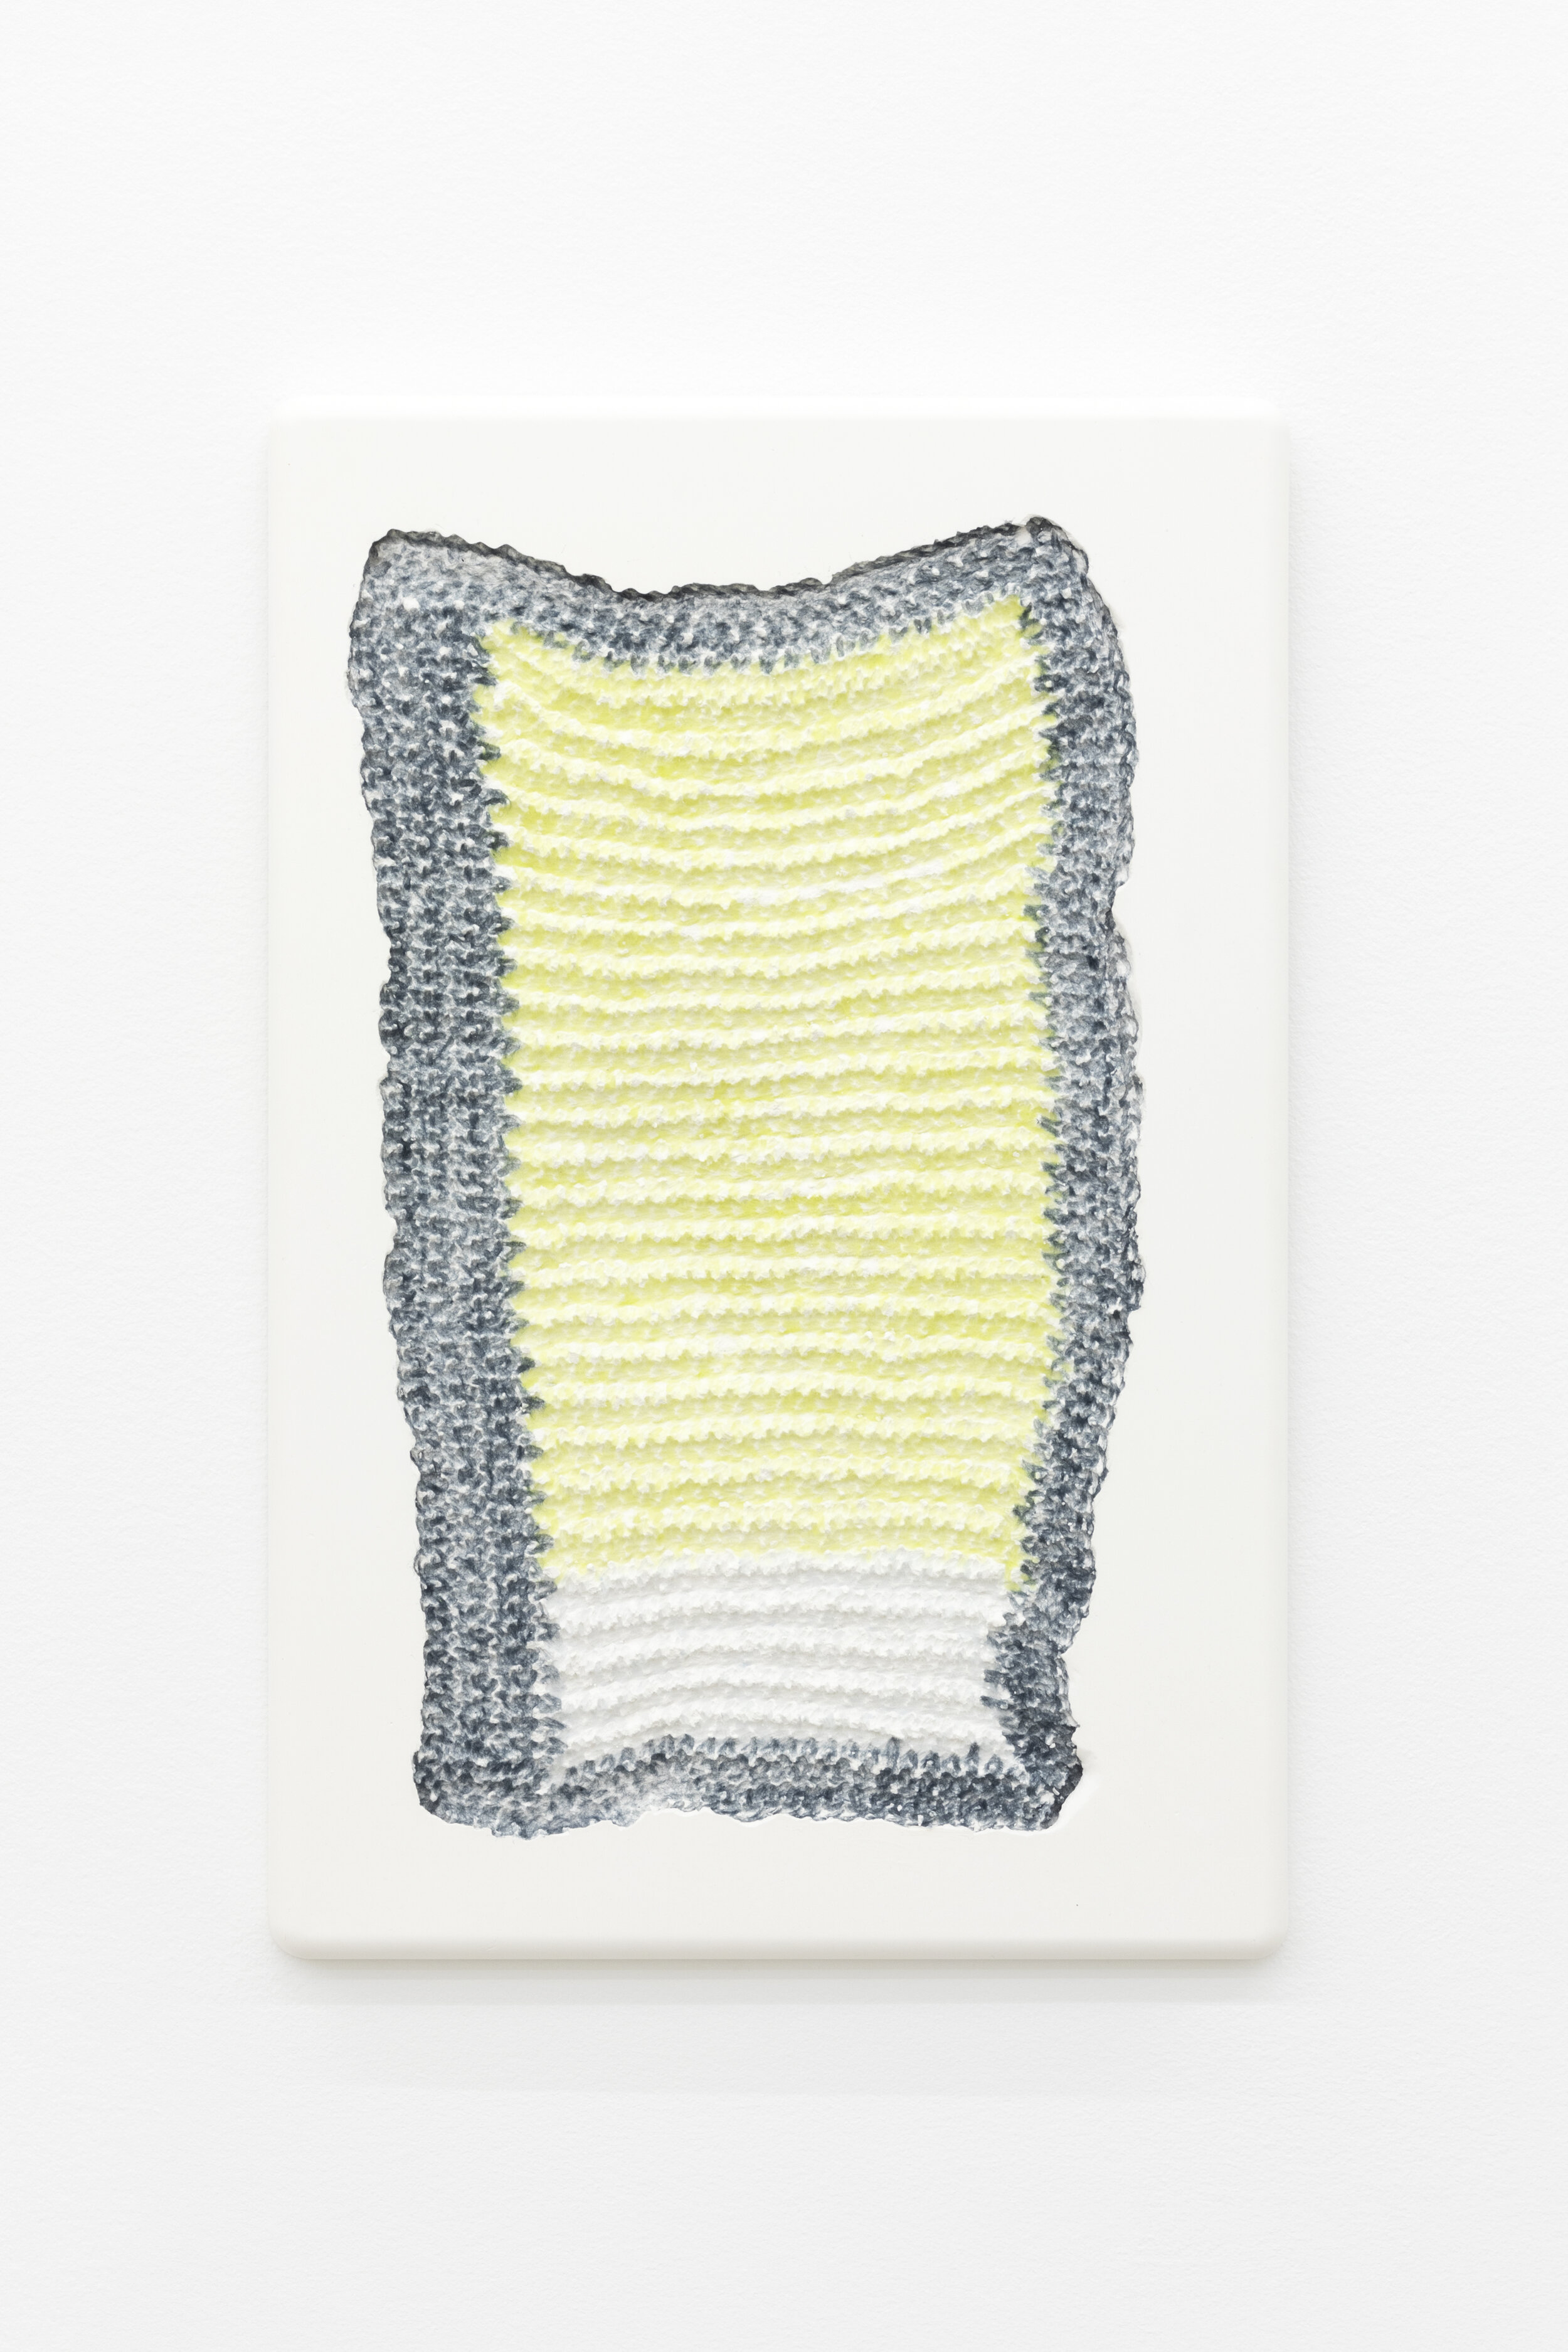  Michelle Grabner   Untitled , 2020  plaster cast with dyed cotton fibers  20 x 13 in. 